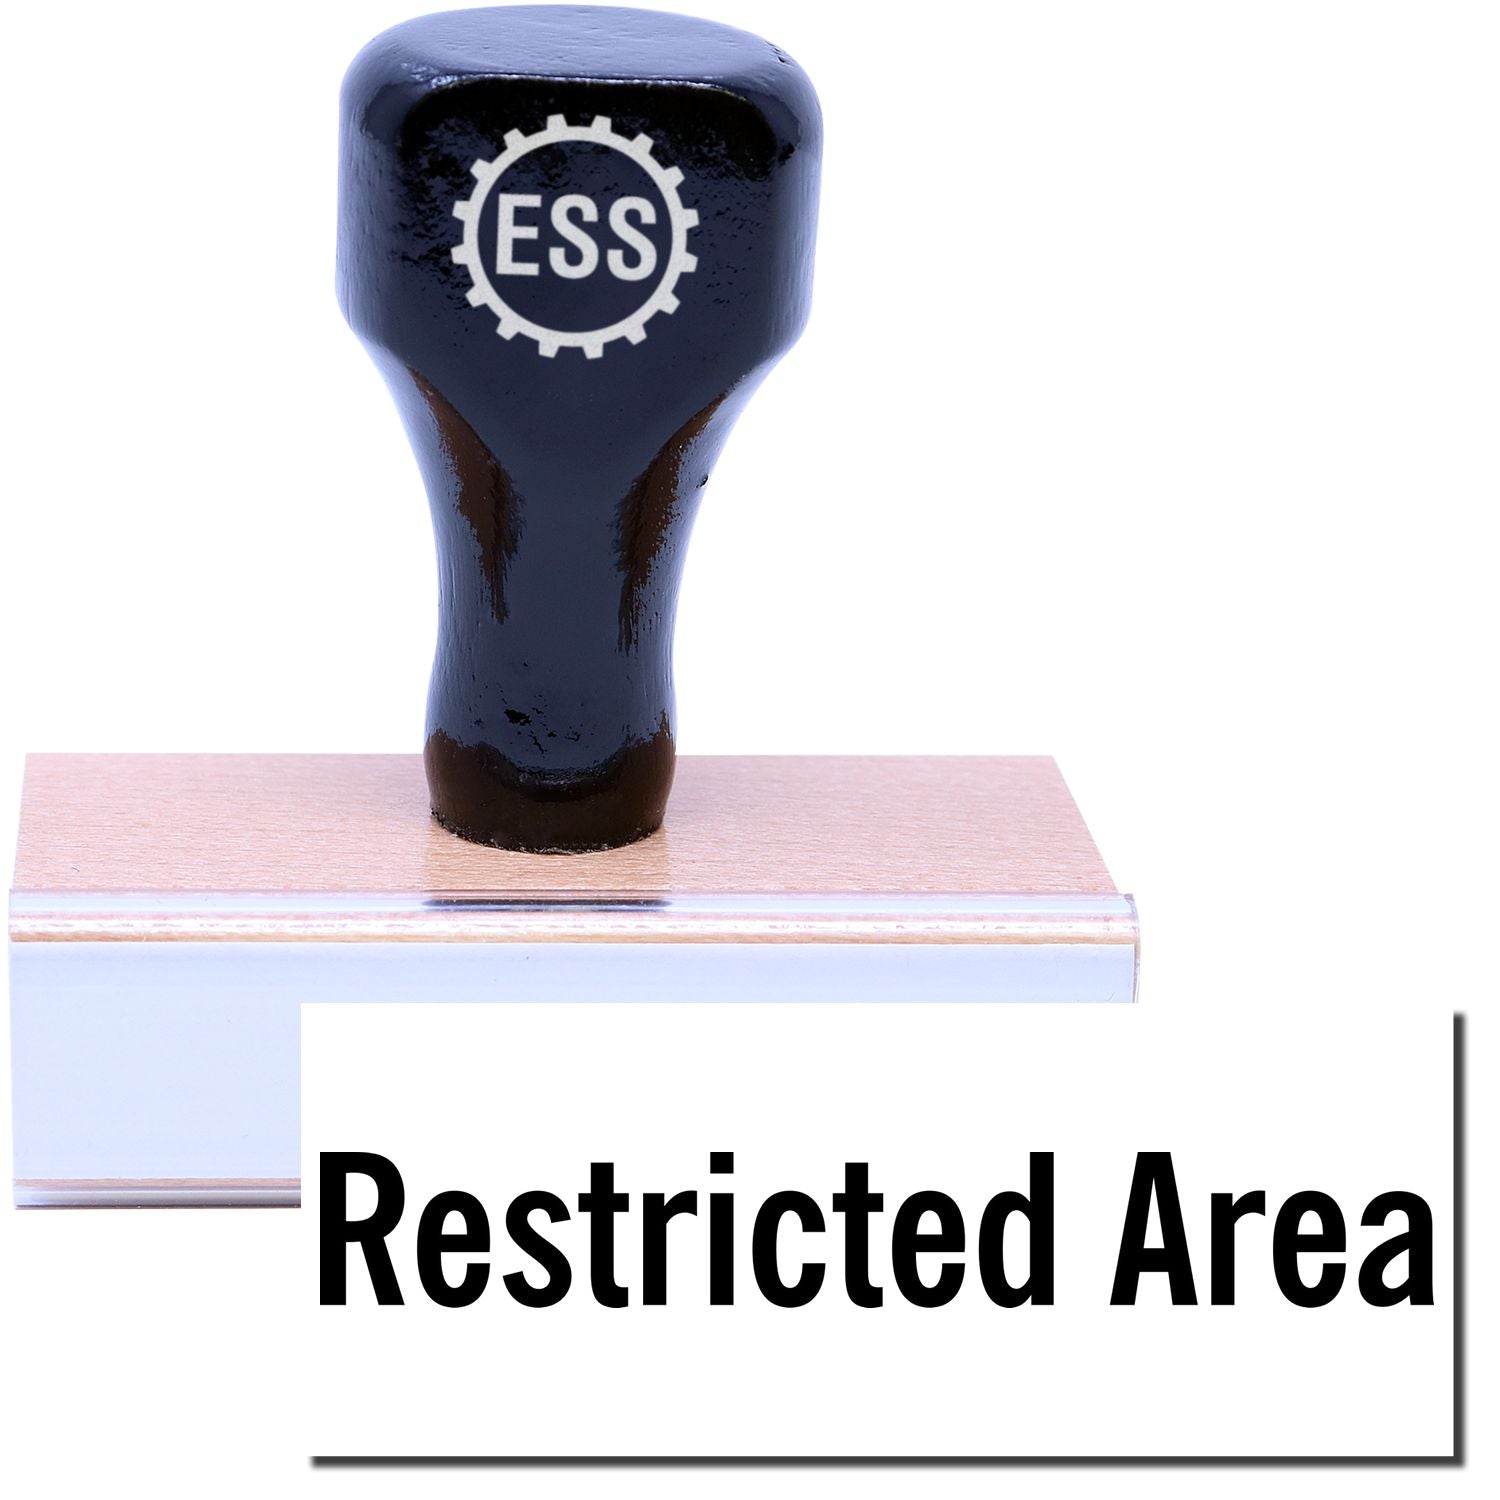 A stock office rubber stamp with a stamped image showing how the text "Restricted Area" in a large font is displayed after stamping.